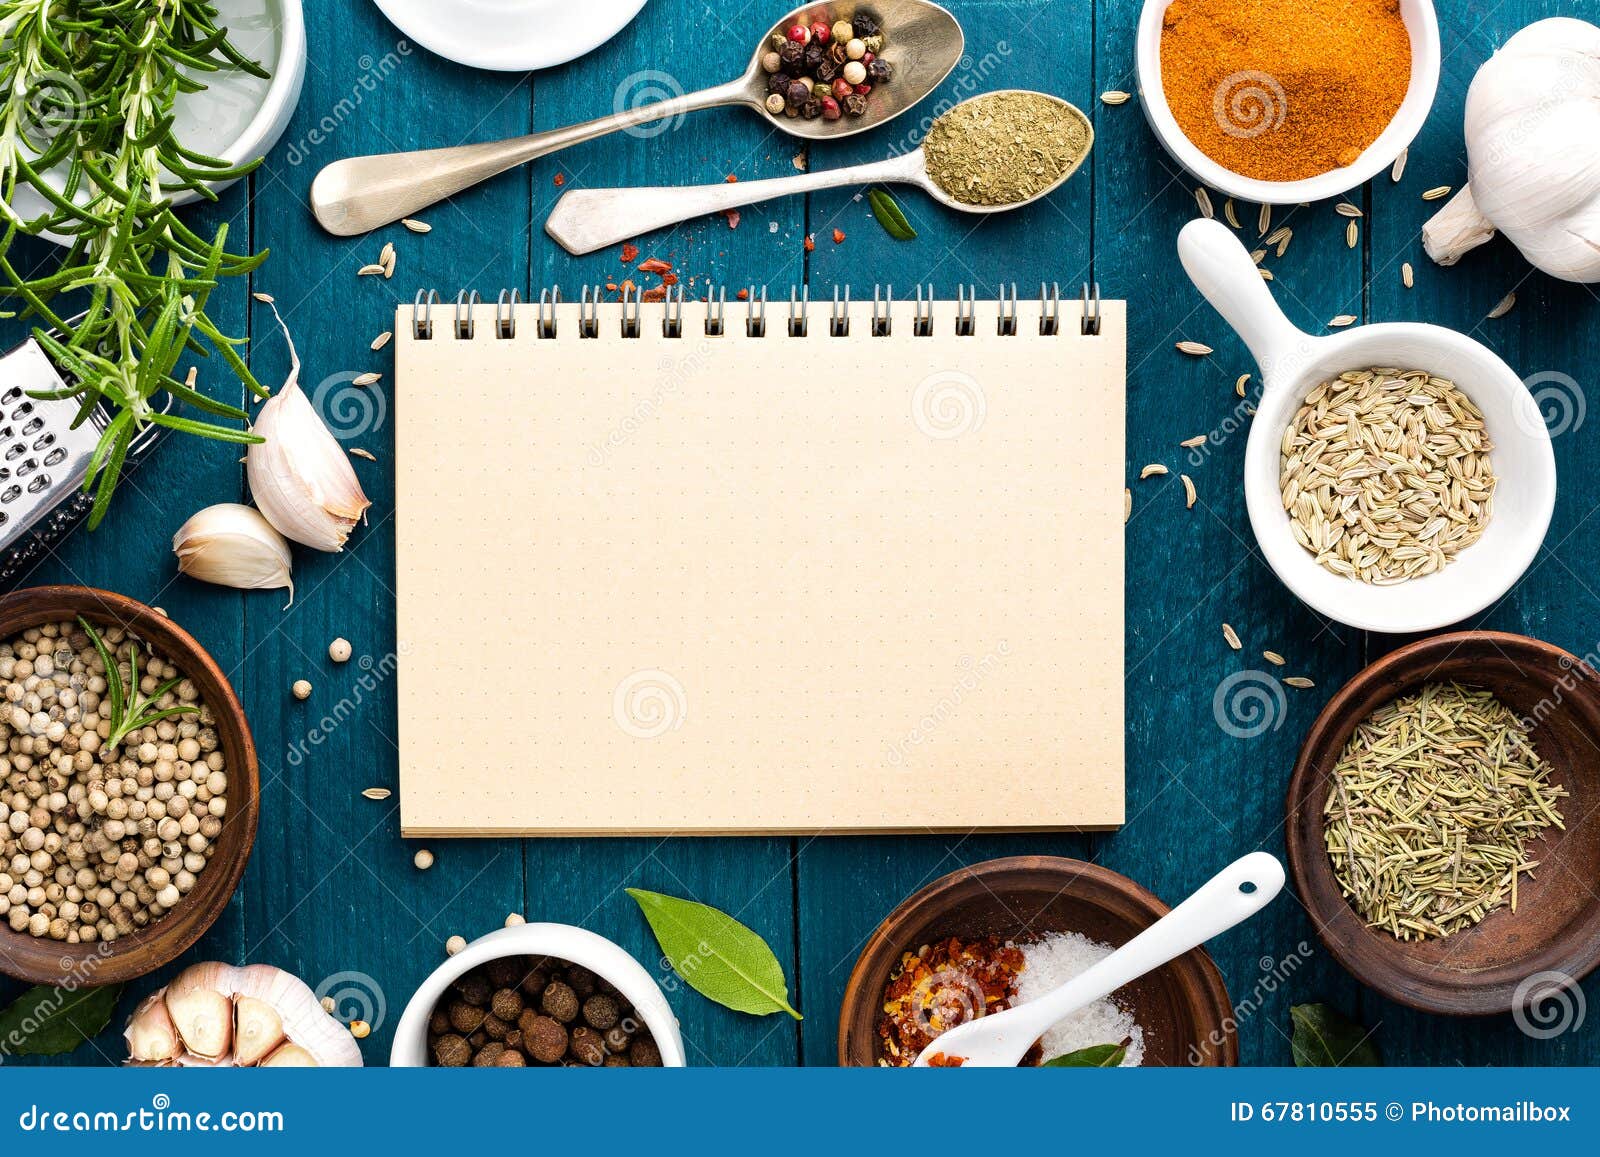 culinary background and recipe book with spices on wooden table